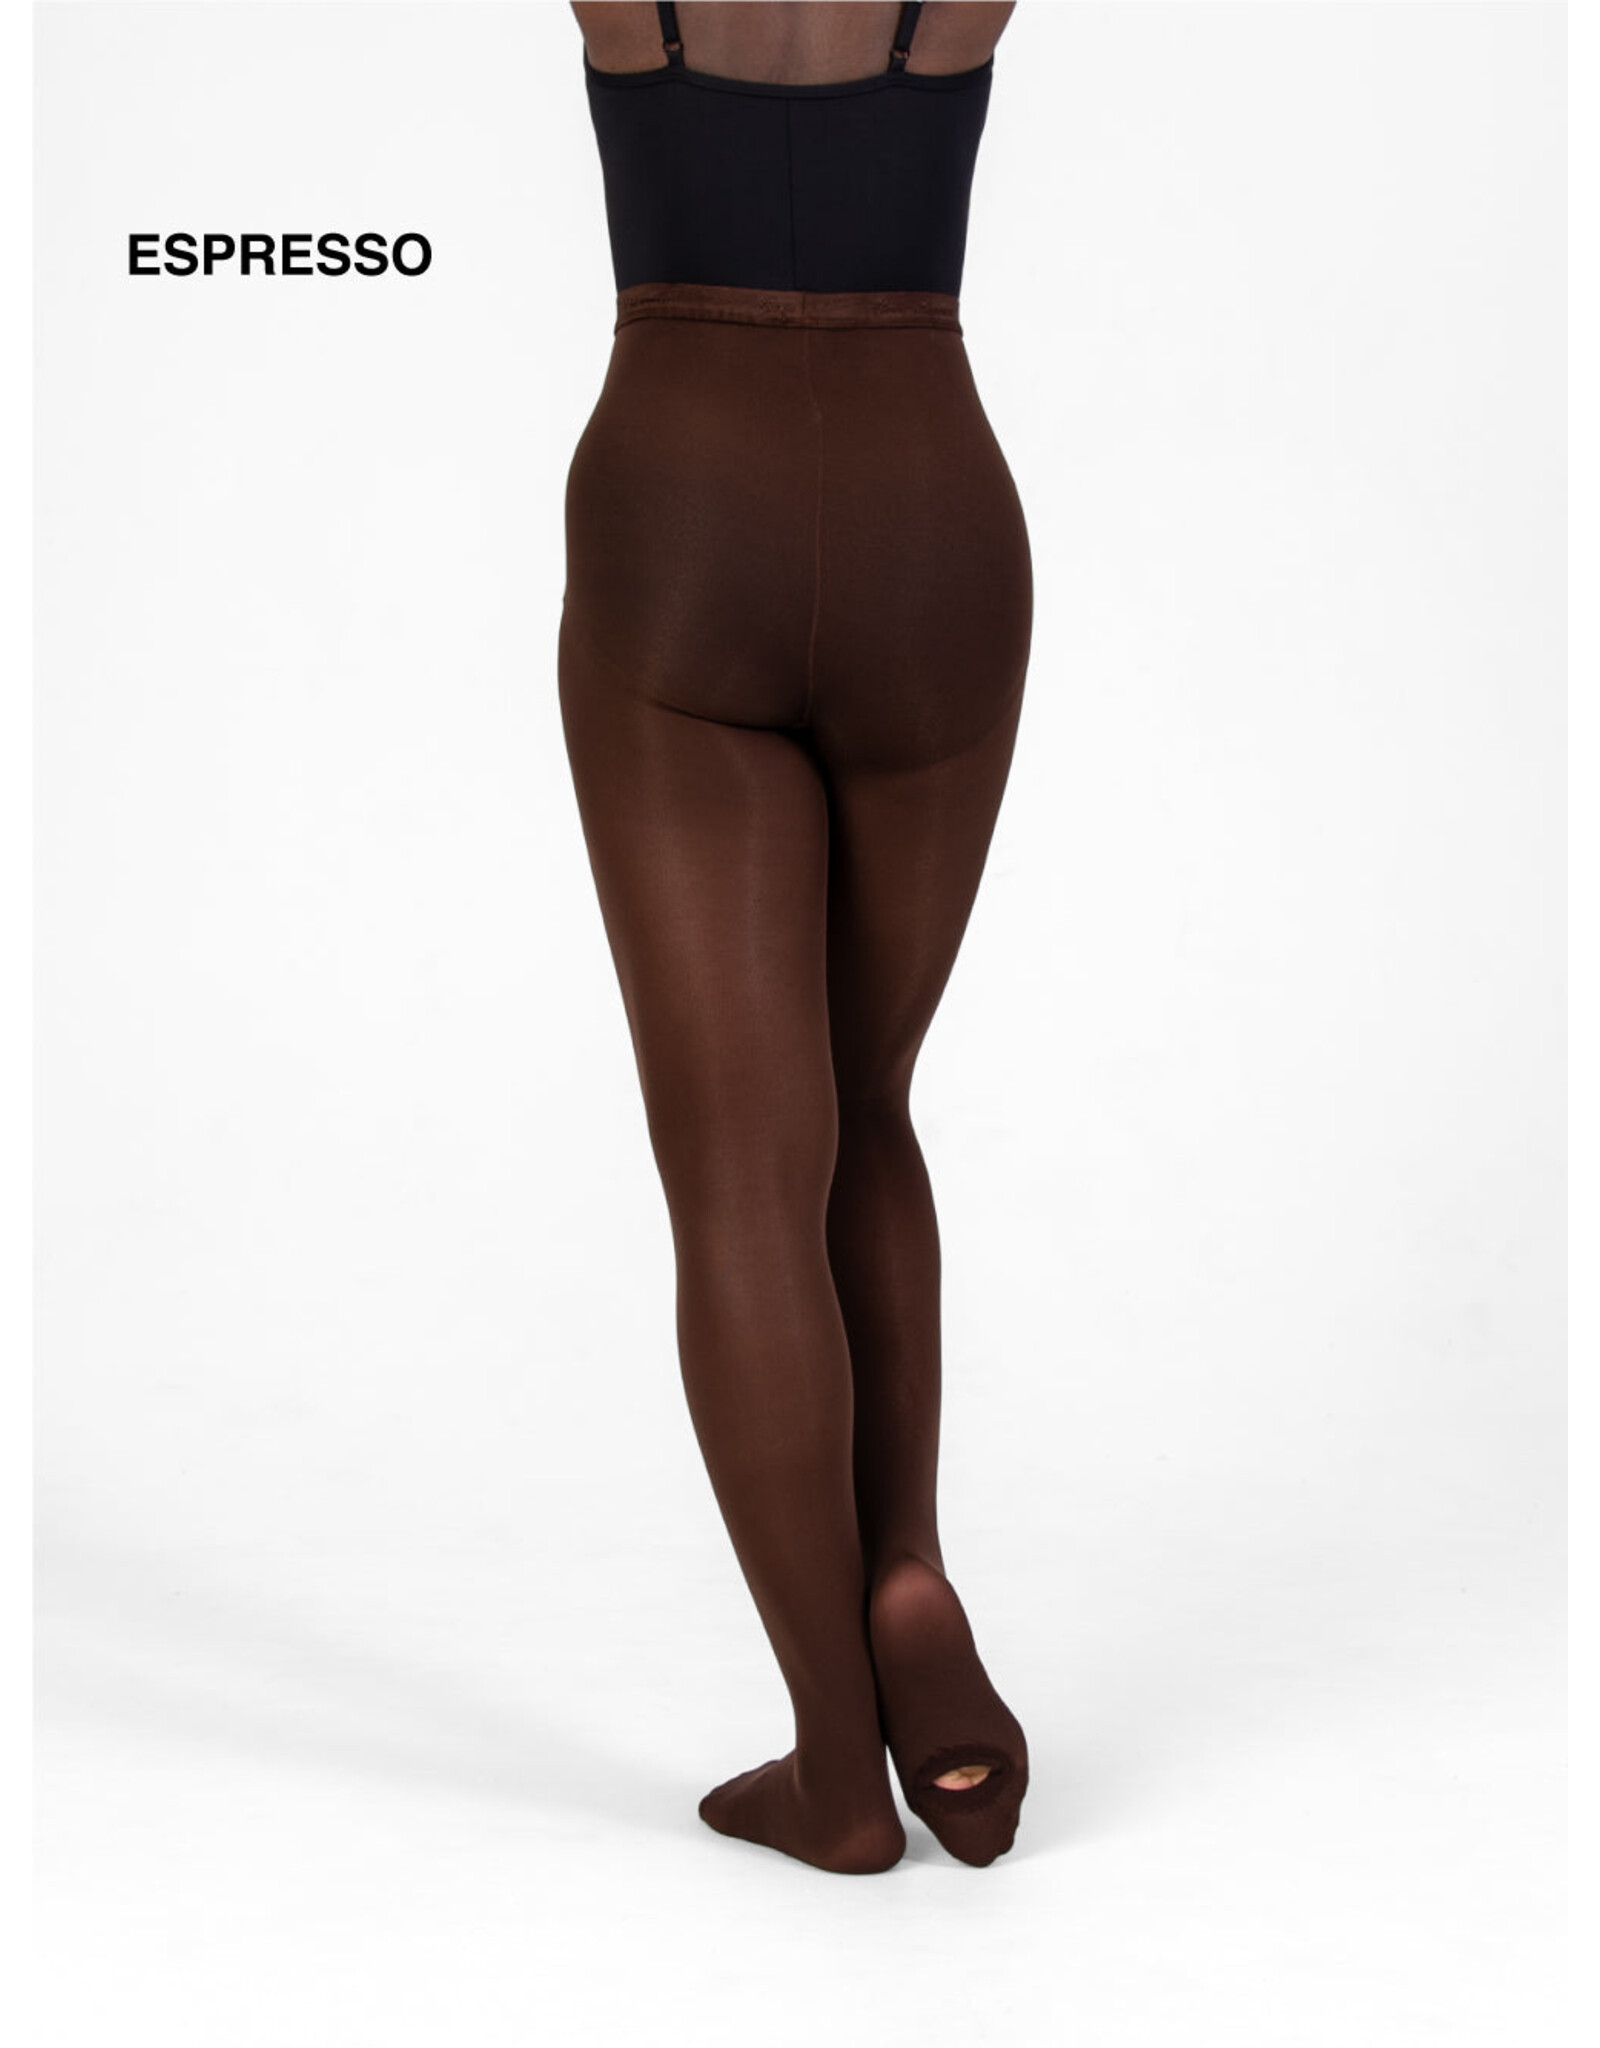 Plus Size TotalSTRETCH Convertible Dance Tights by Body Wrappers